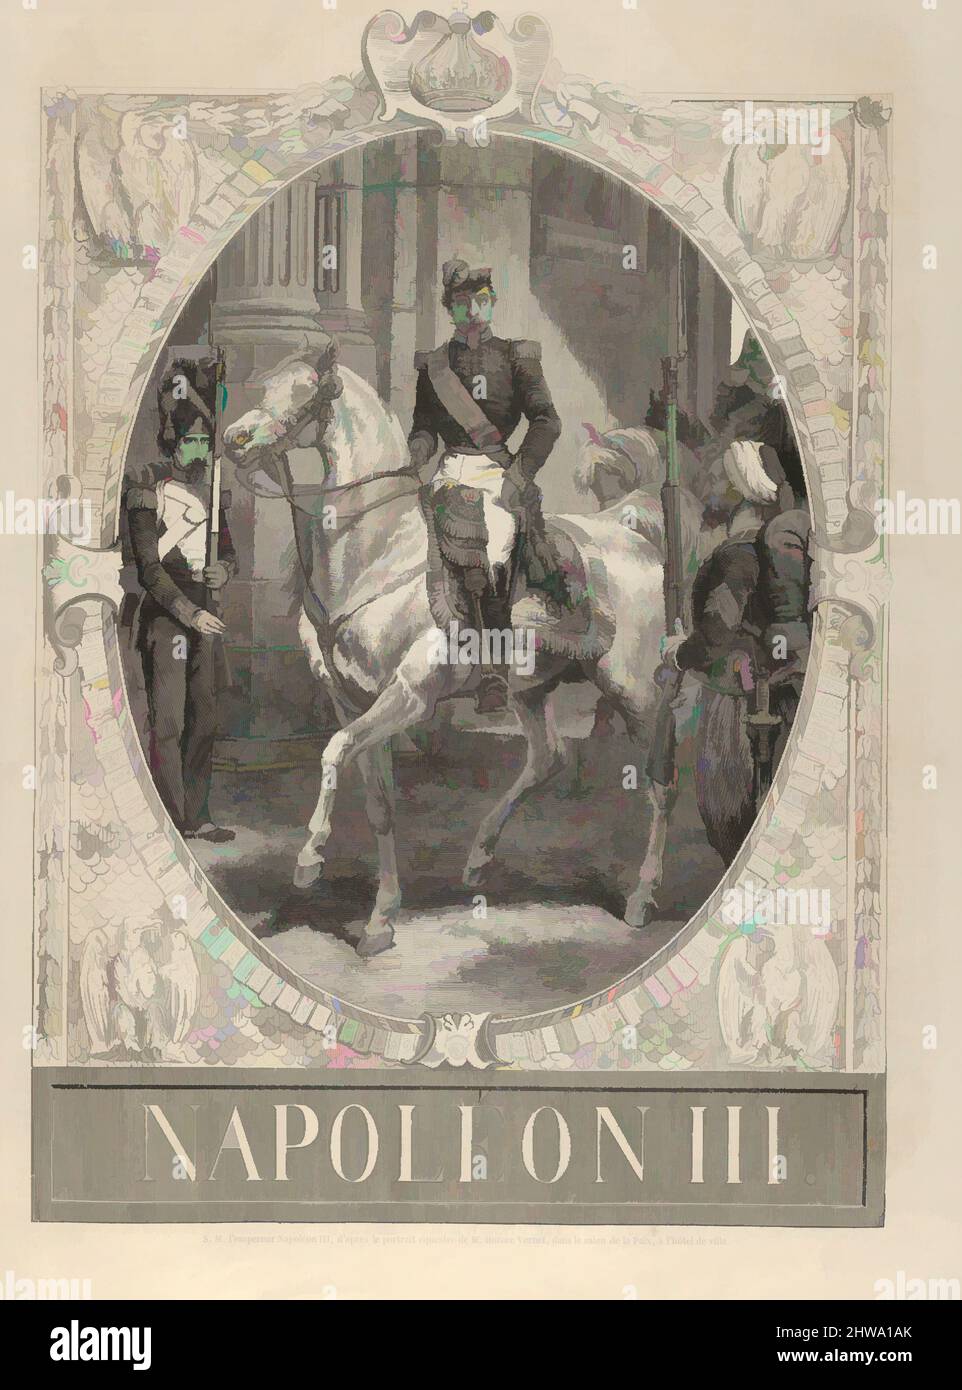 Art inspired by Drawings and Prints, Print, Napoléon III (from L'Illustration), Artist, Engraver, After, Horace Vernet, Anonymous, French, Classic works modernized by Artotop with a splash of modernity. Shapes, color and value, eye-catching visual impact on art. Emotions through freedom of artworks in a contemporary way. A timeless message pursuing a wildly creative new direction. Artists turning to the digital medium and creating the Artotop NFT Stock Photo